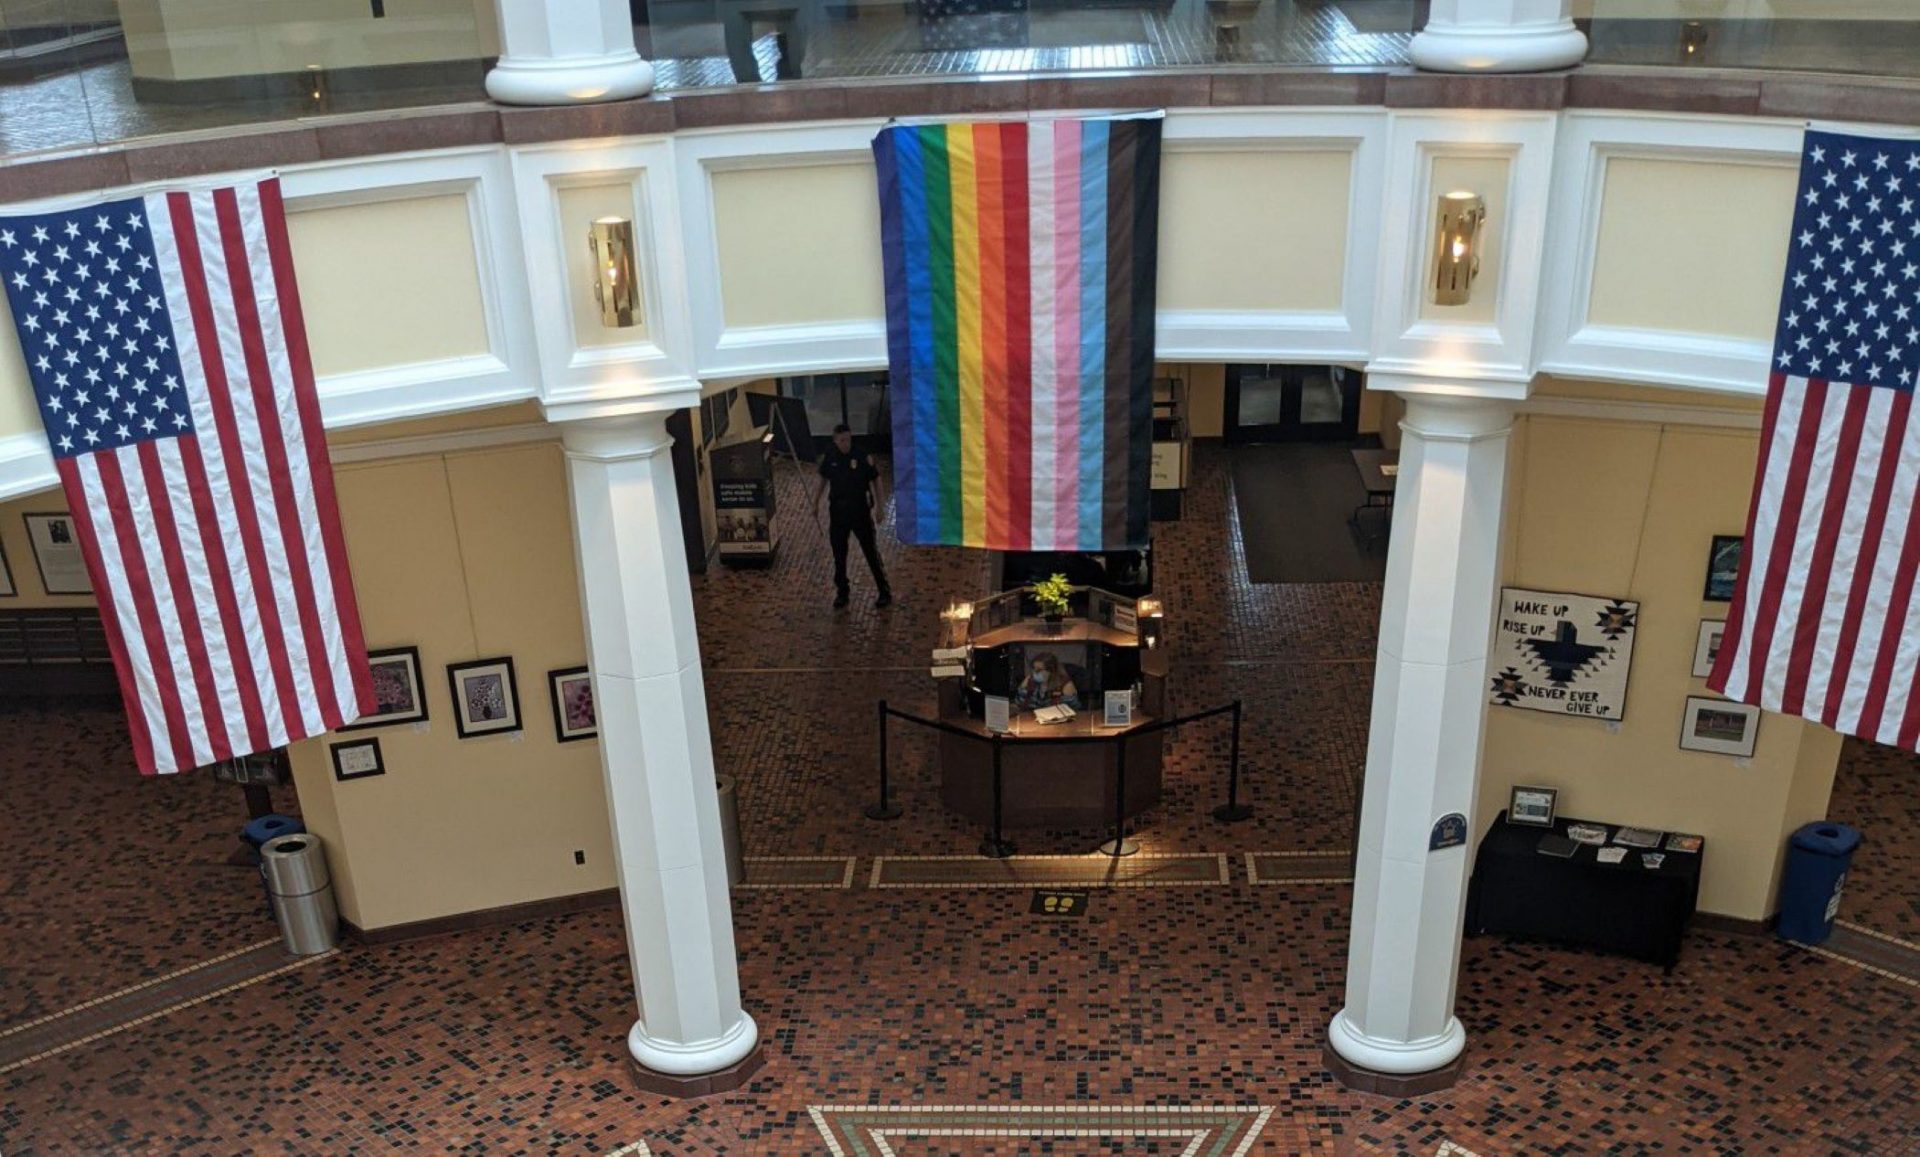 A Pride flag is currently hanging inside the Capitol’s East Wing Rotunda as part of a permitted display requested by the Commission on LGBTQ Affairs’ executive director.